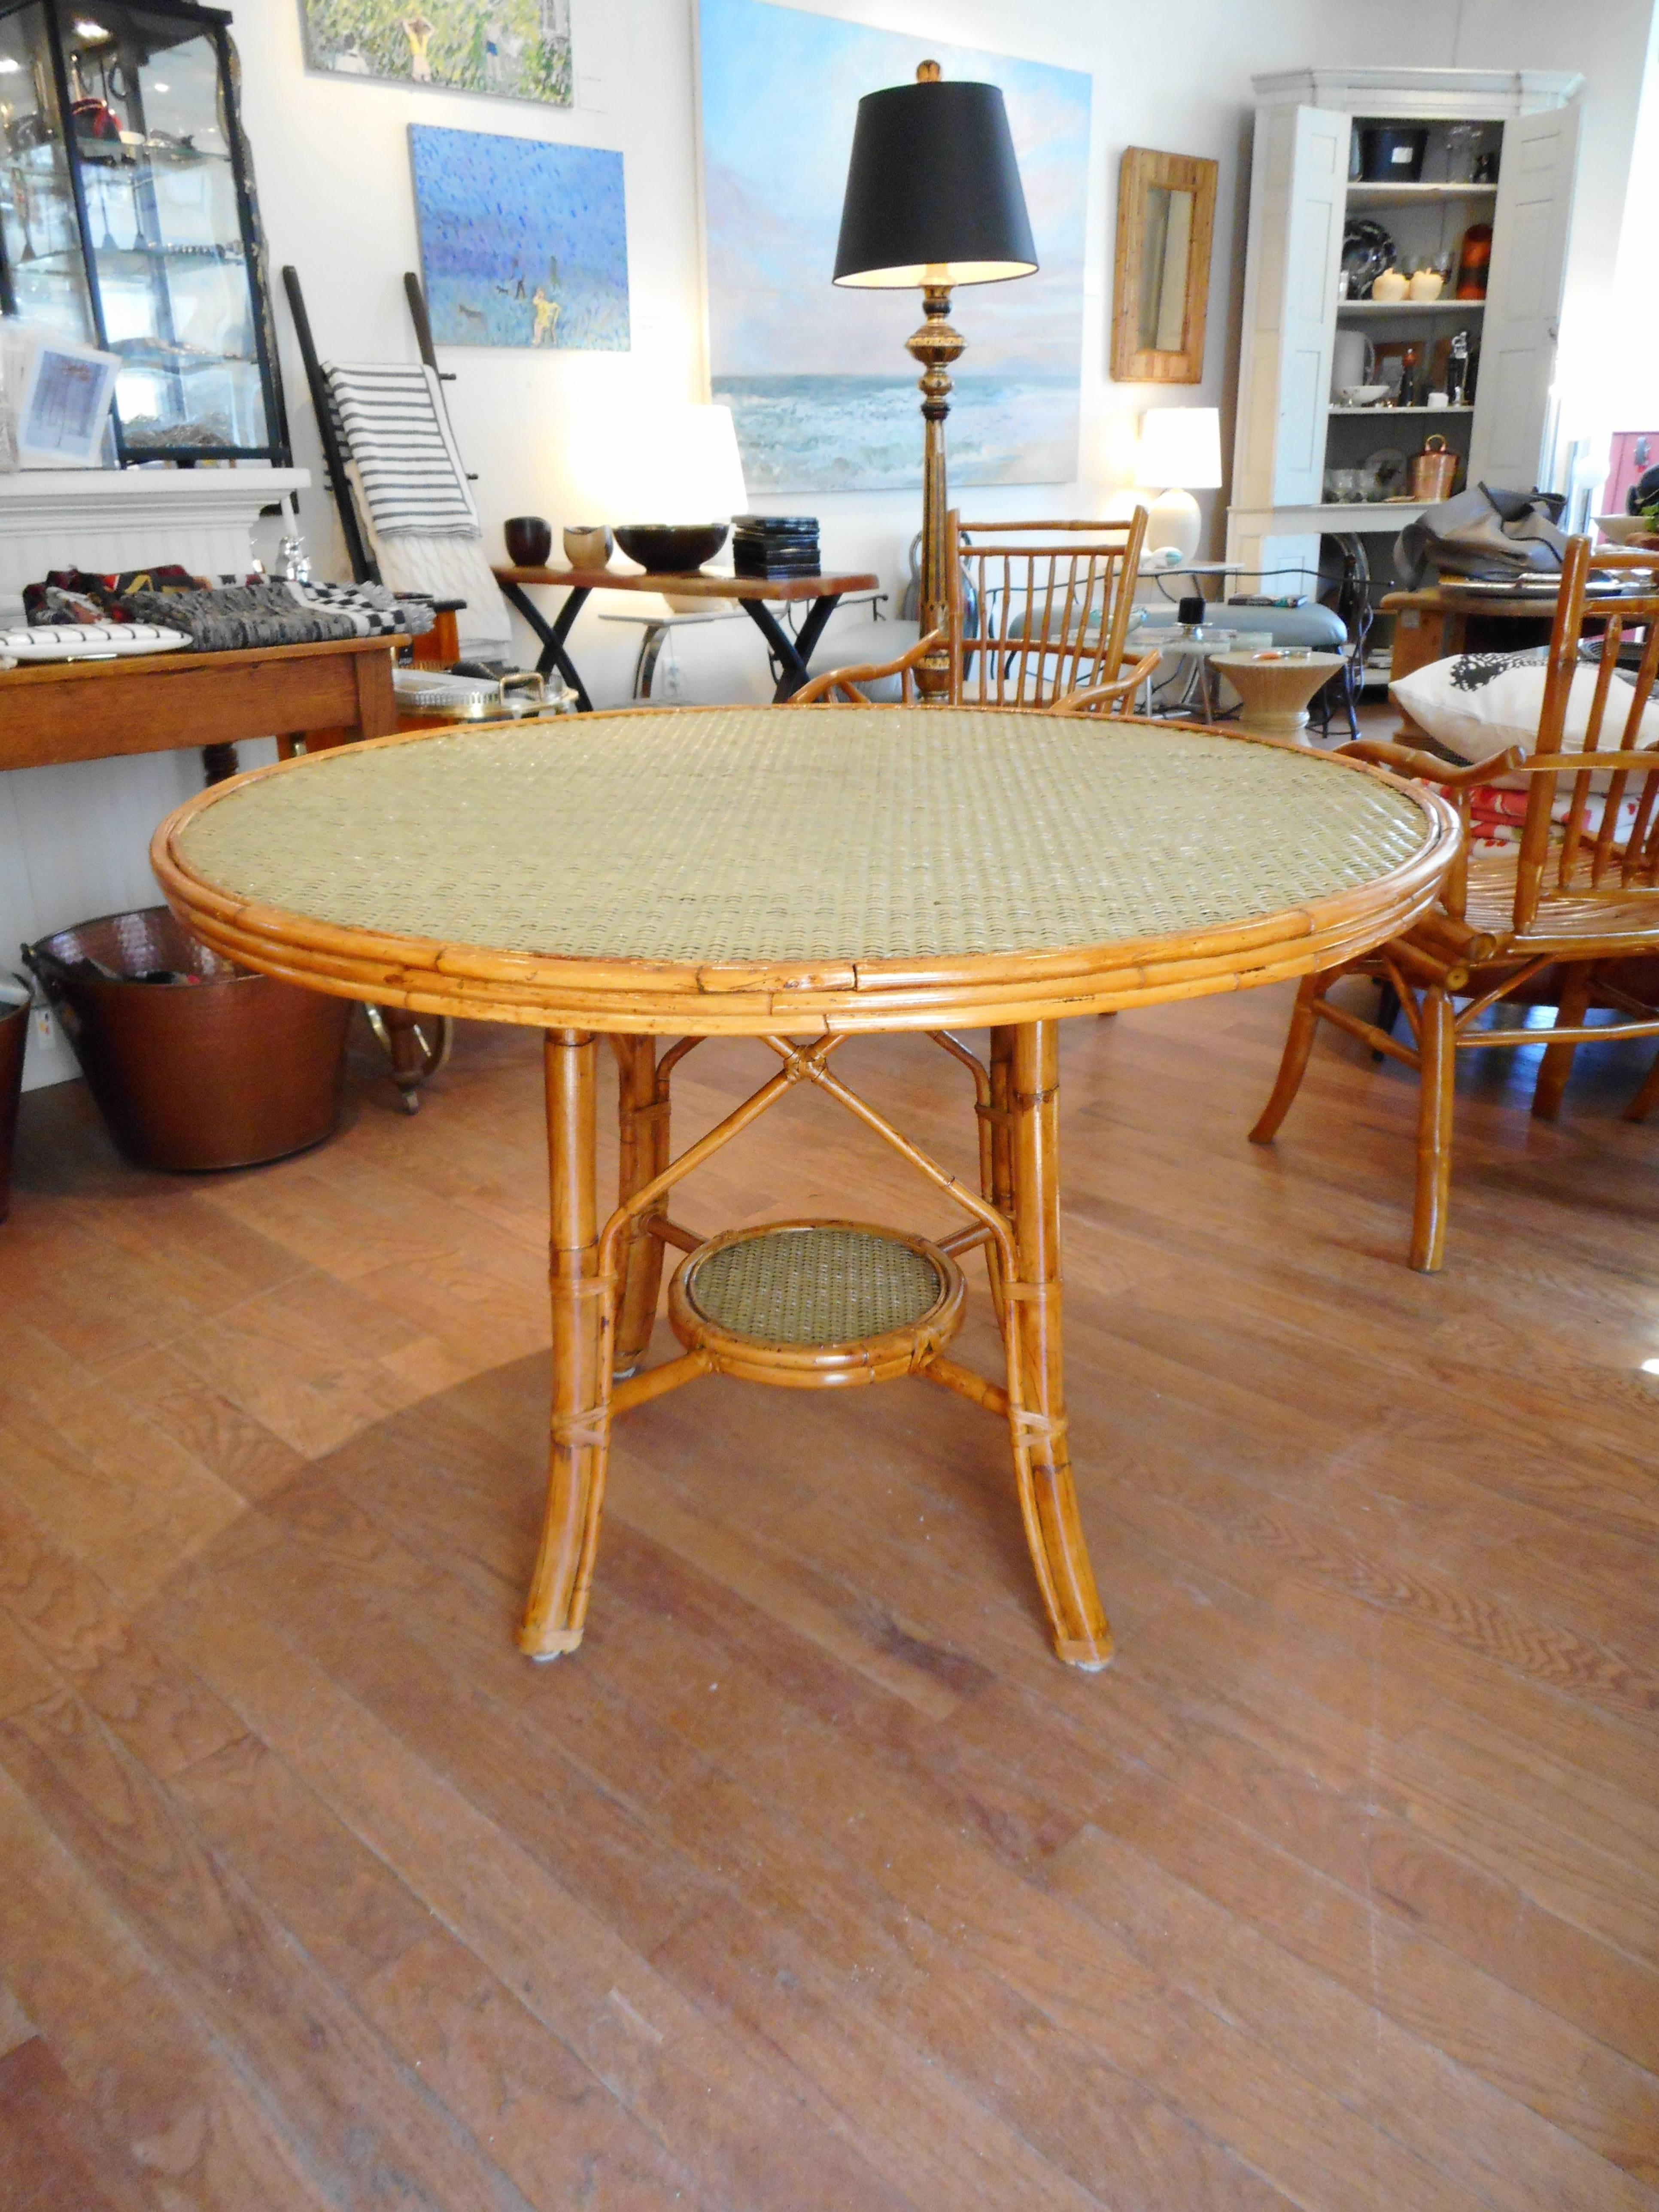 British Colonial Ficks and Reed Midcentury Bamboo Table and Four Chairs